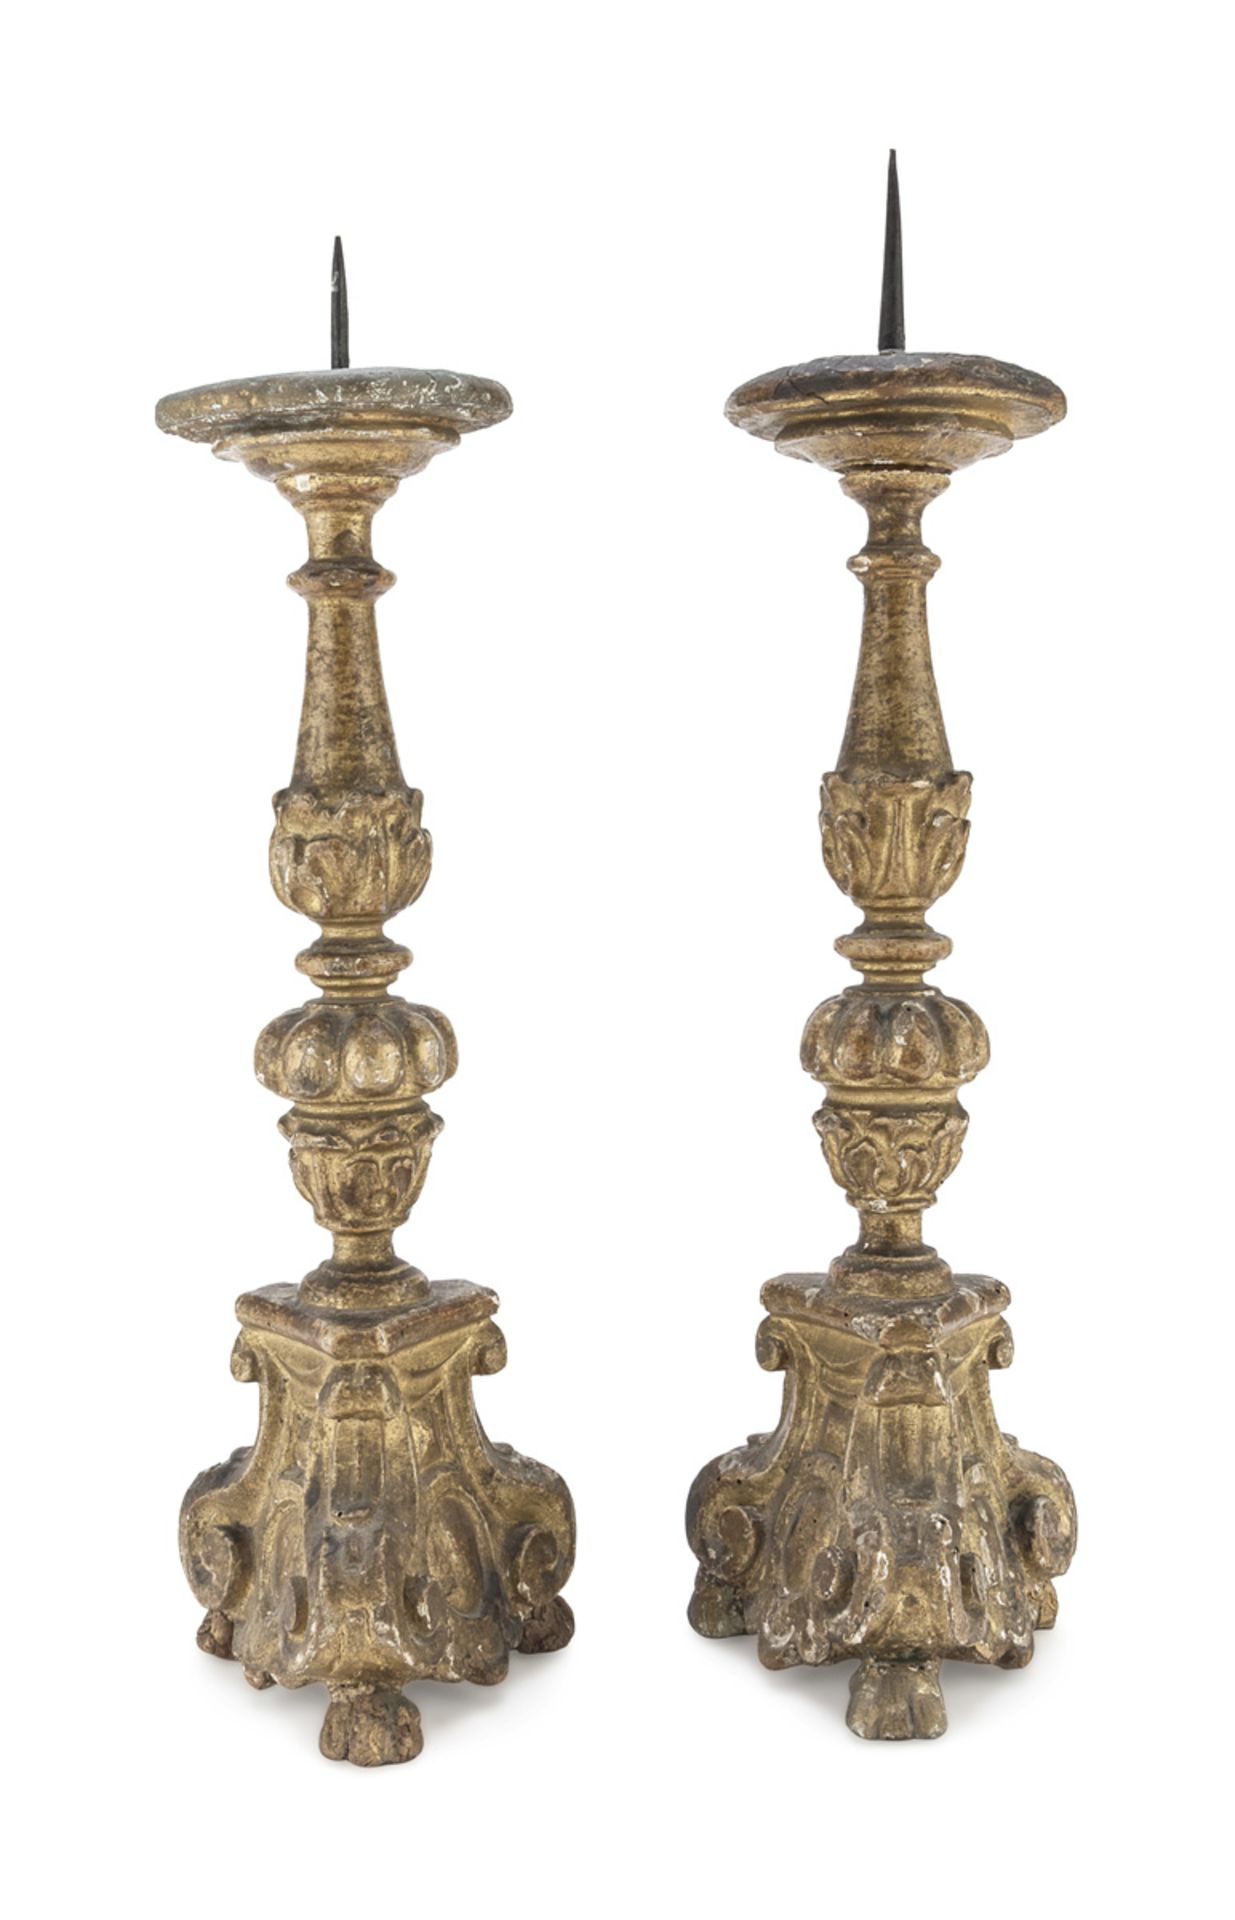 A PAIR OF GILTWOOD CANDLESTICKS - 18TH CENTURY